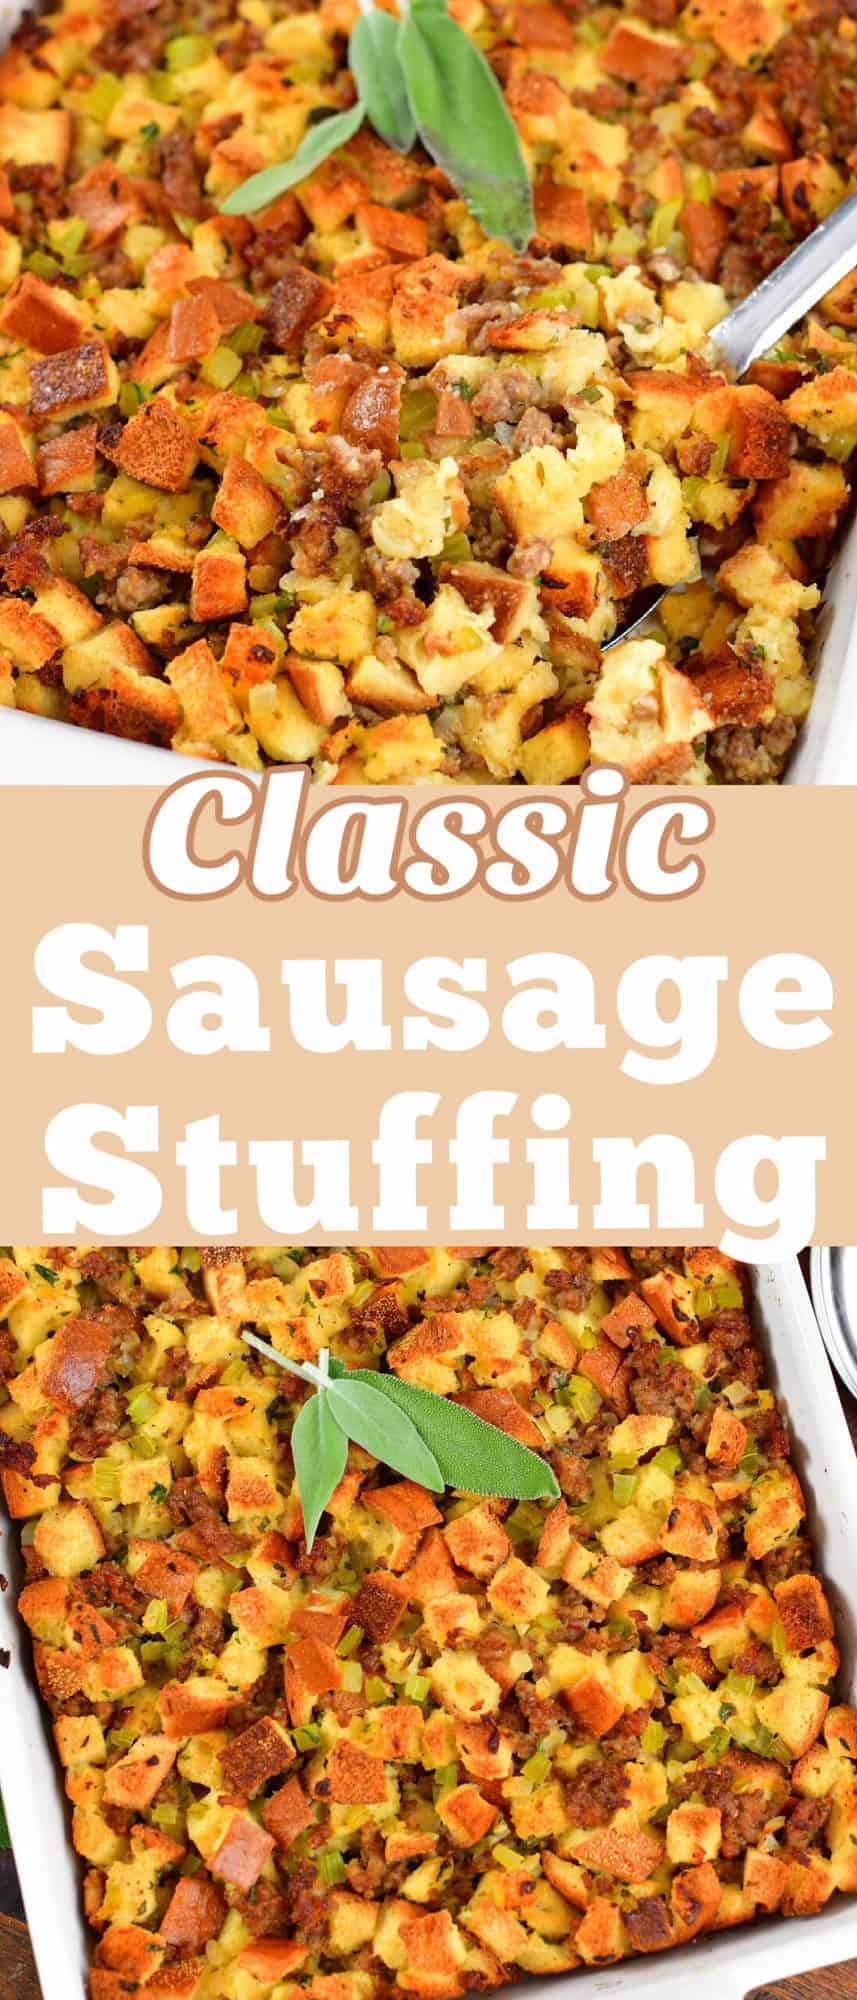 collage of two close-up images of sausage stuffing with title